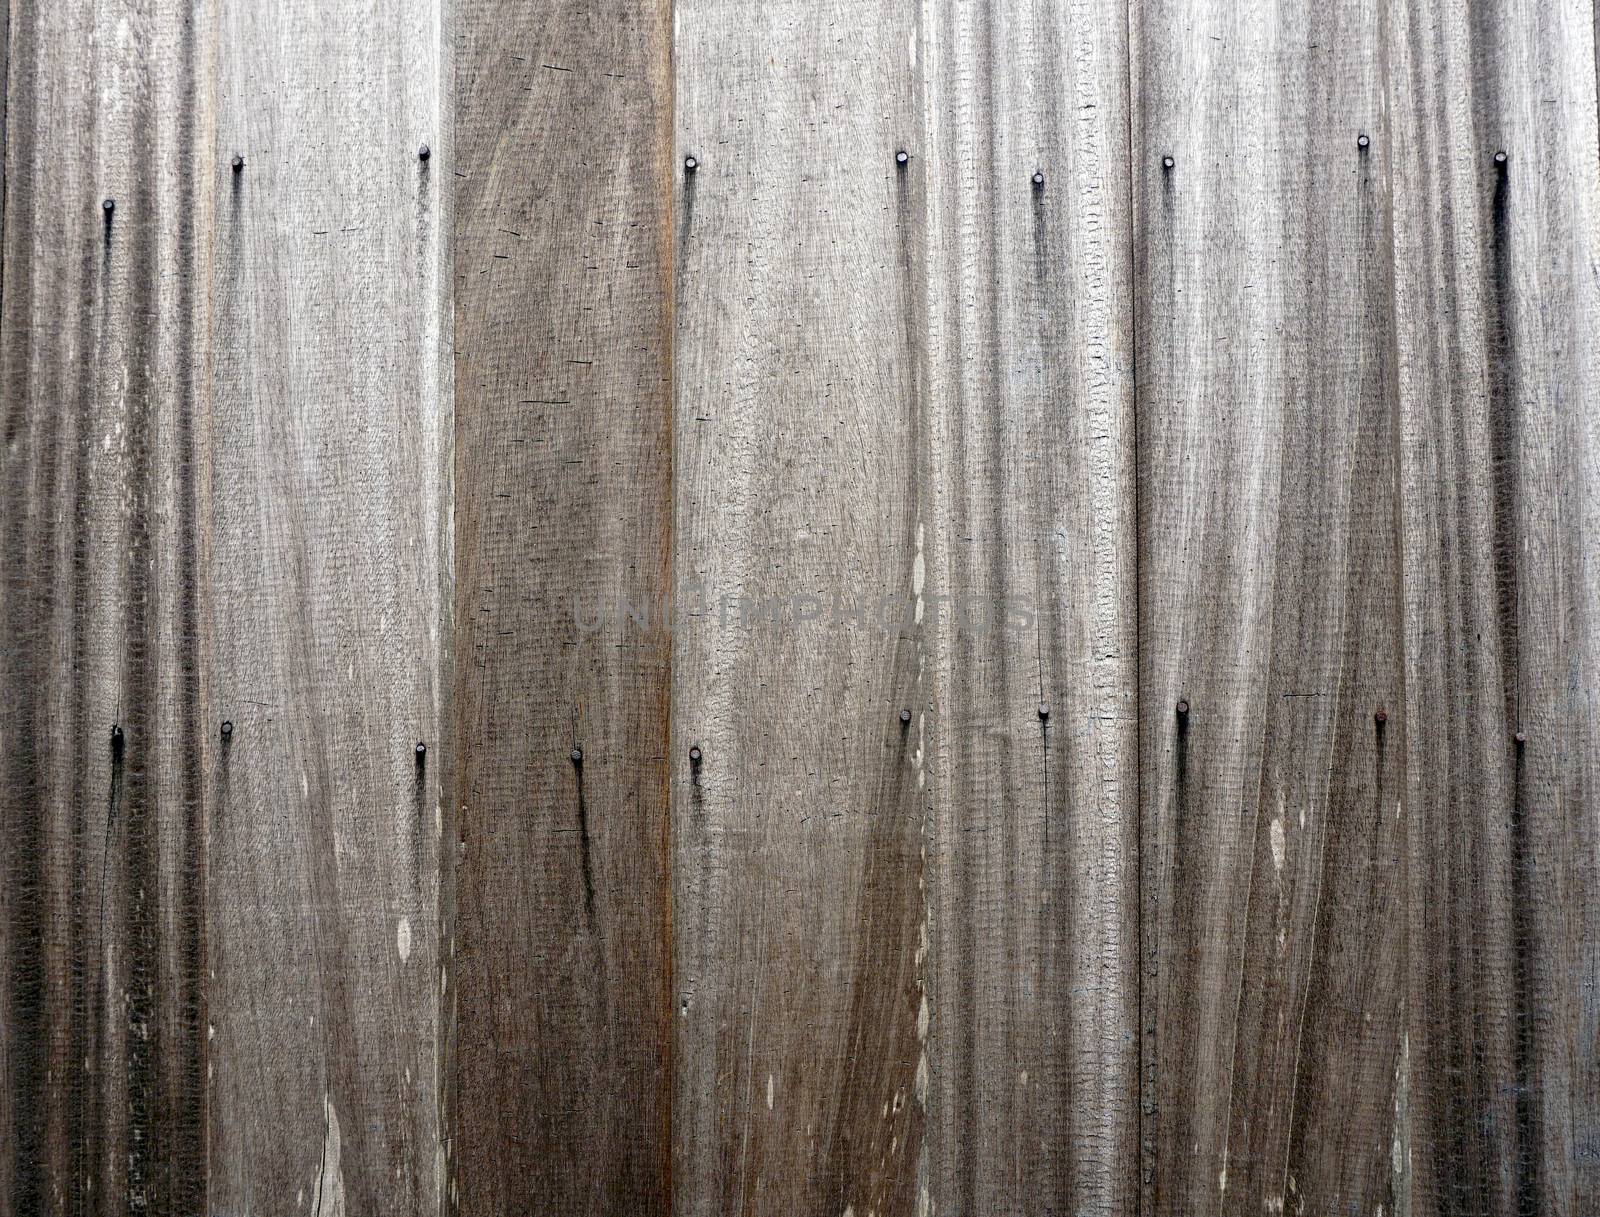 Wooden strips wall with rivets  by polarbearstudio